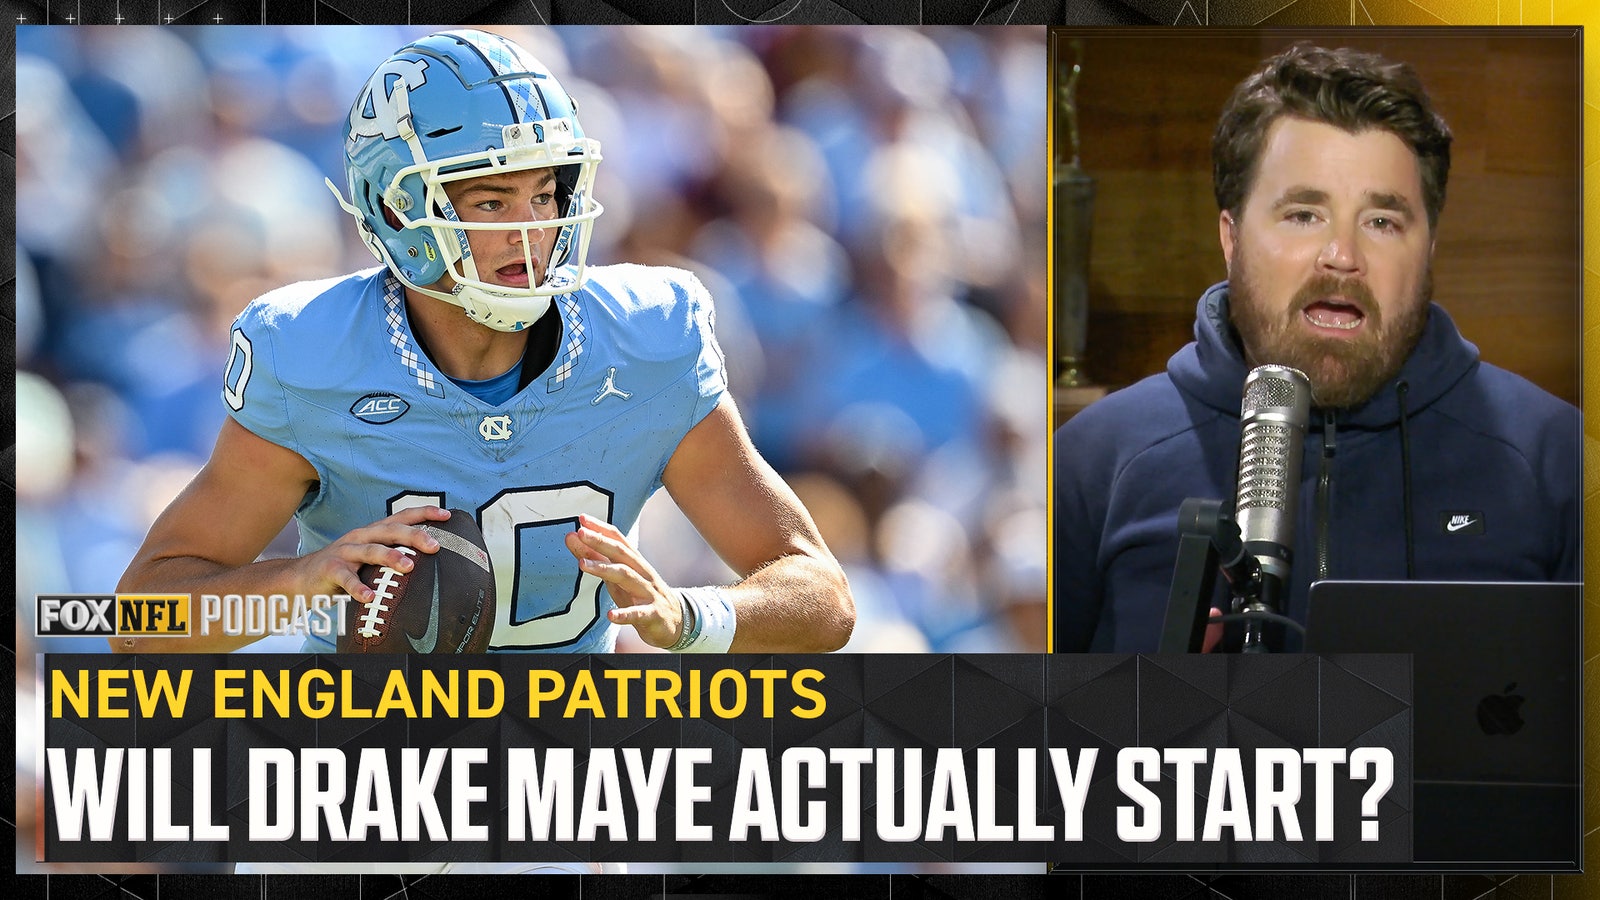 Will the New England Patriots SIT Drake Maye in favor of Jacoby Brissett?